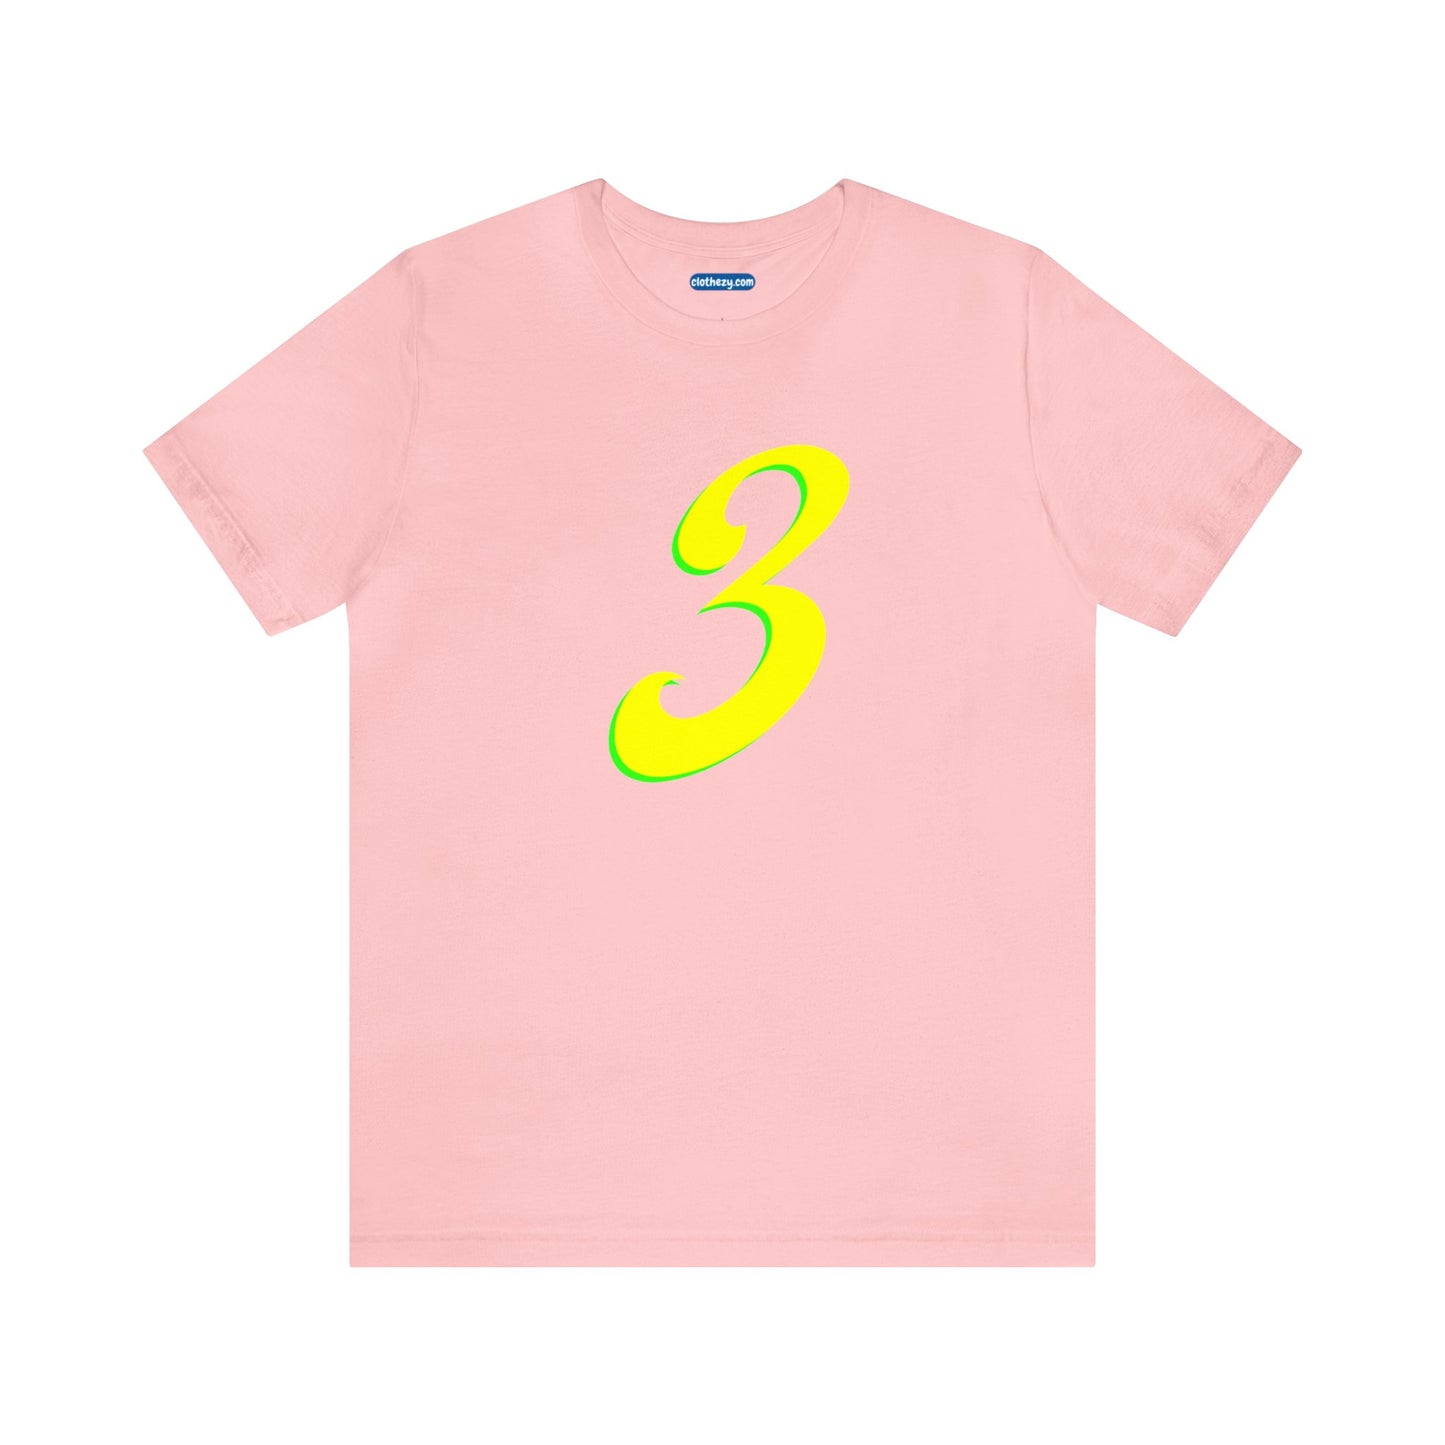 Number 3 Design - Soft Cotton Tee for birthdays and celebrations, Gift for friends and family, Multiple Options by clothezy.com in Pink Size Small - Buy Now